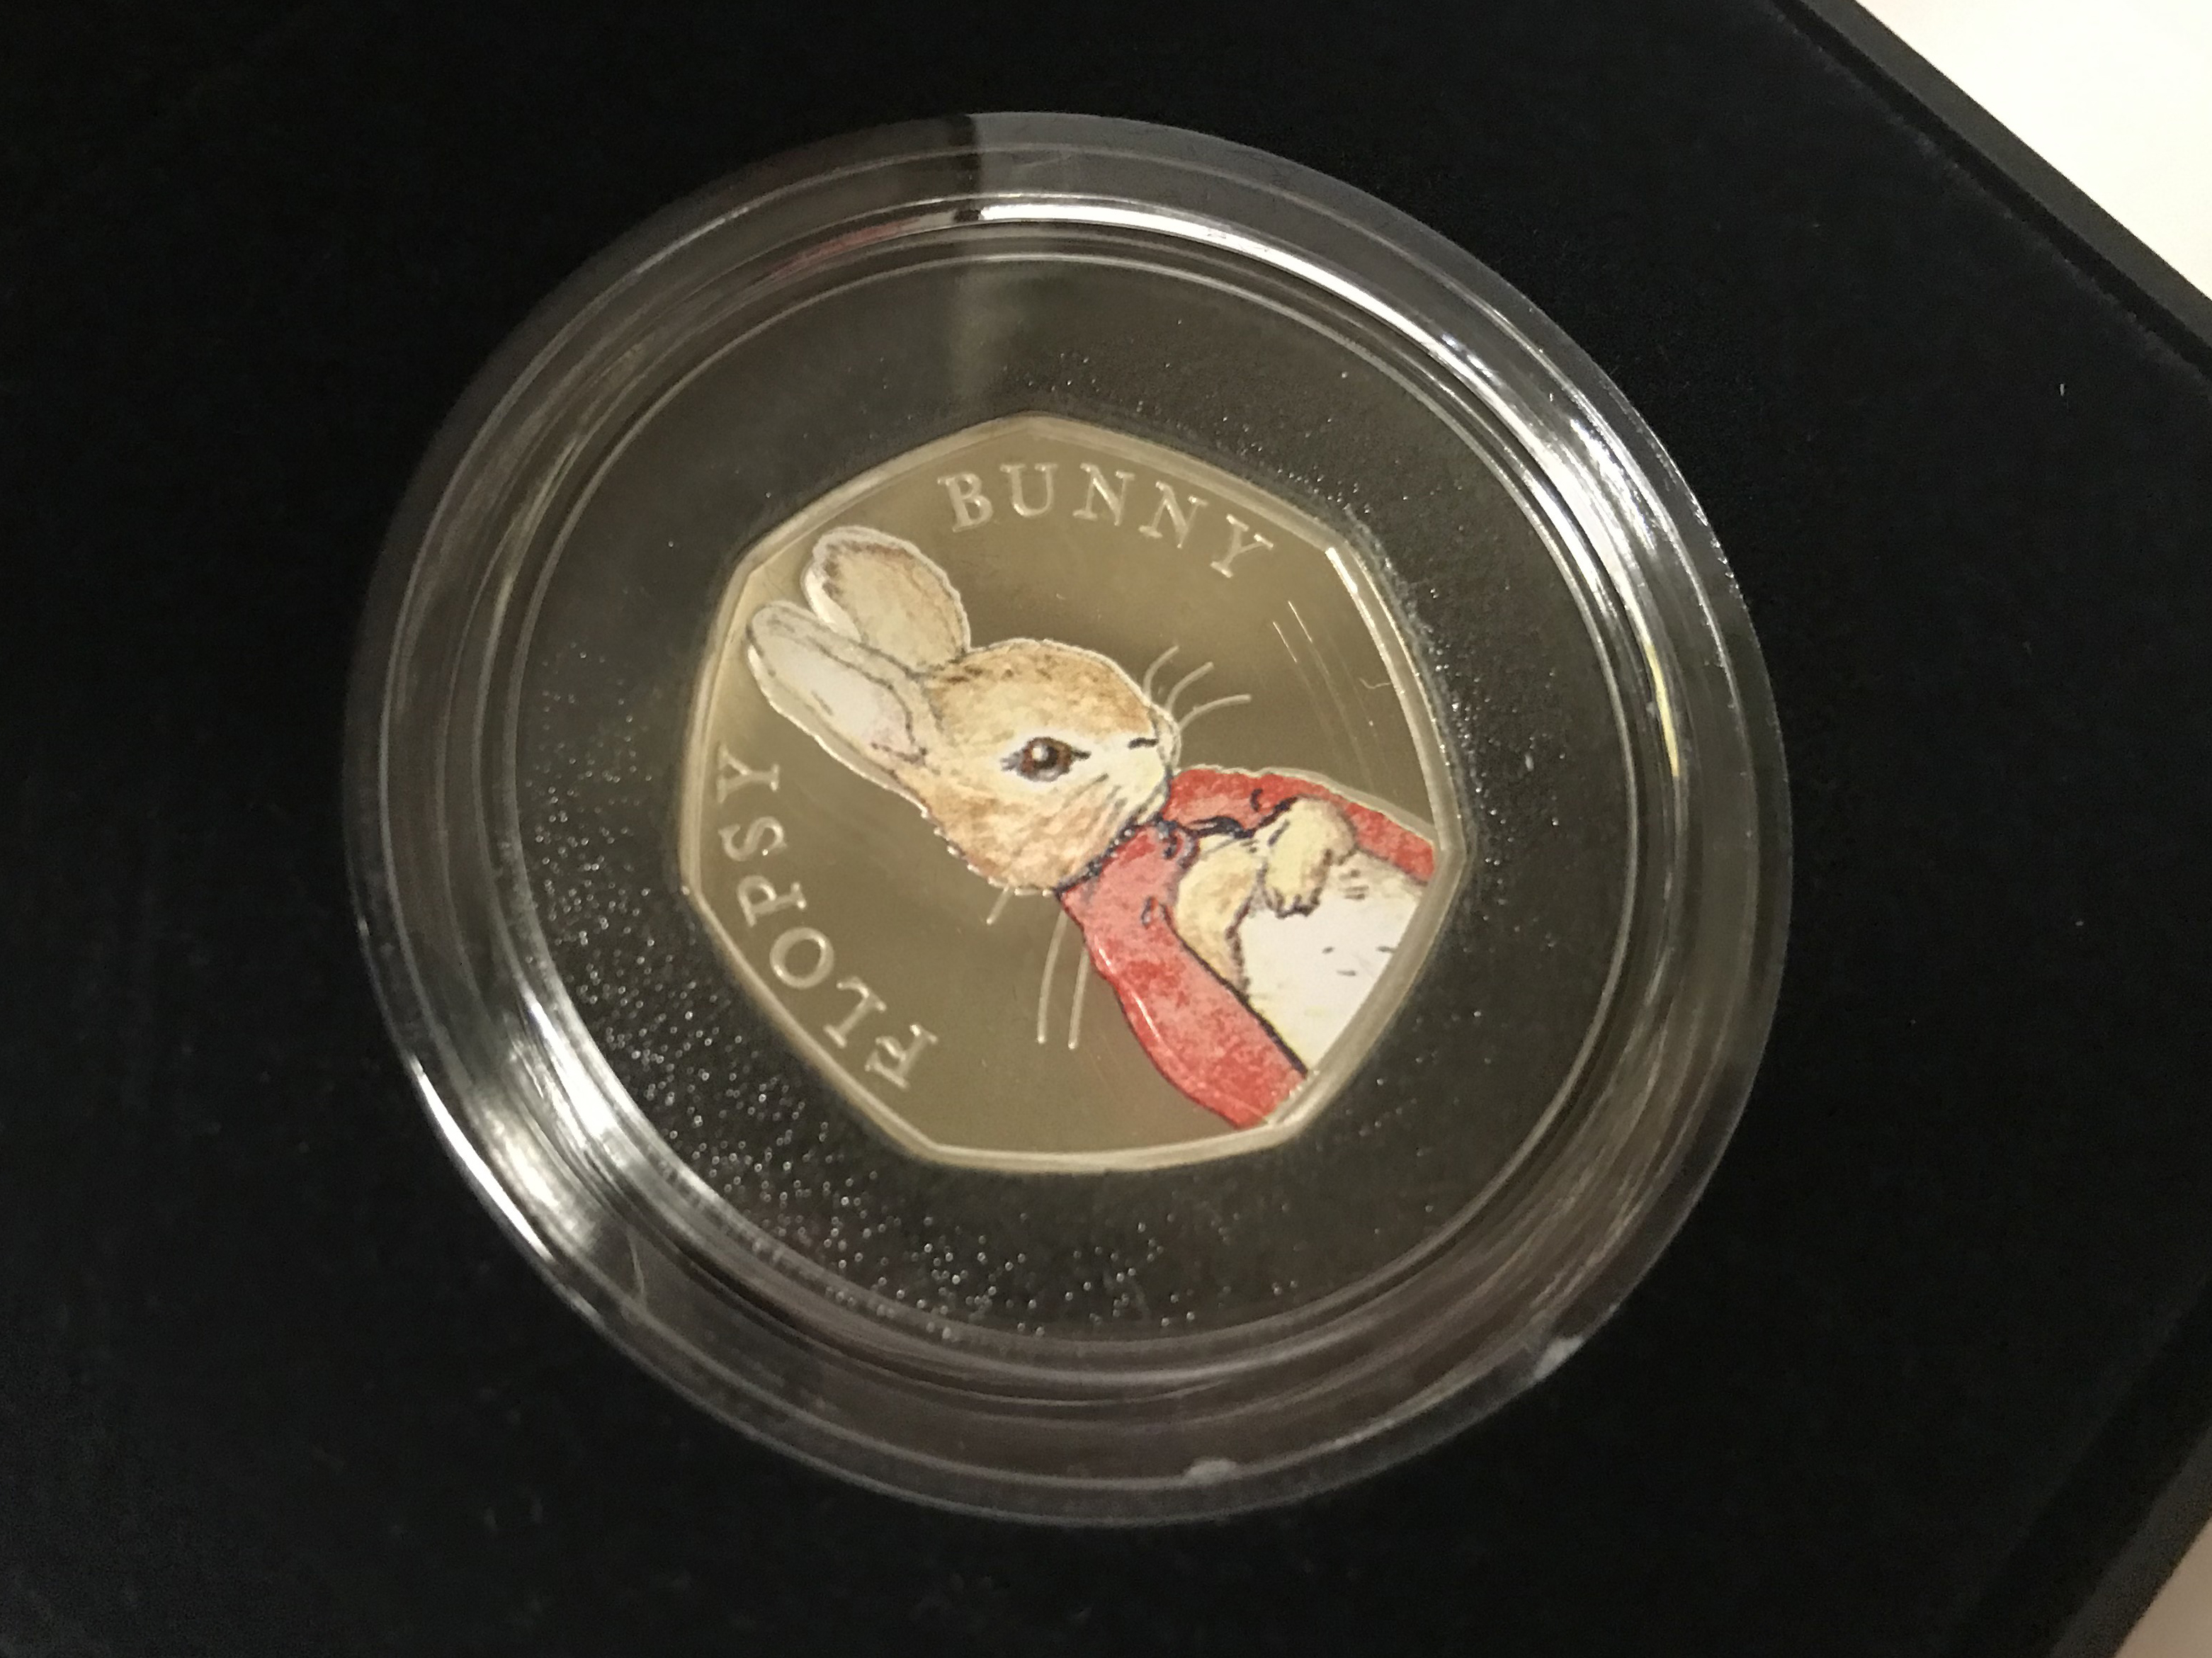 2018 BEATRIX POTTER SET OF FOUR SILVER PROOF COINS BOXED WITH COA - Image 6 of 6